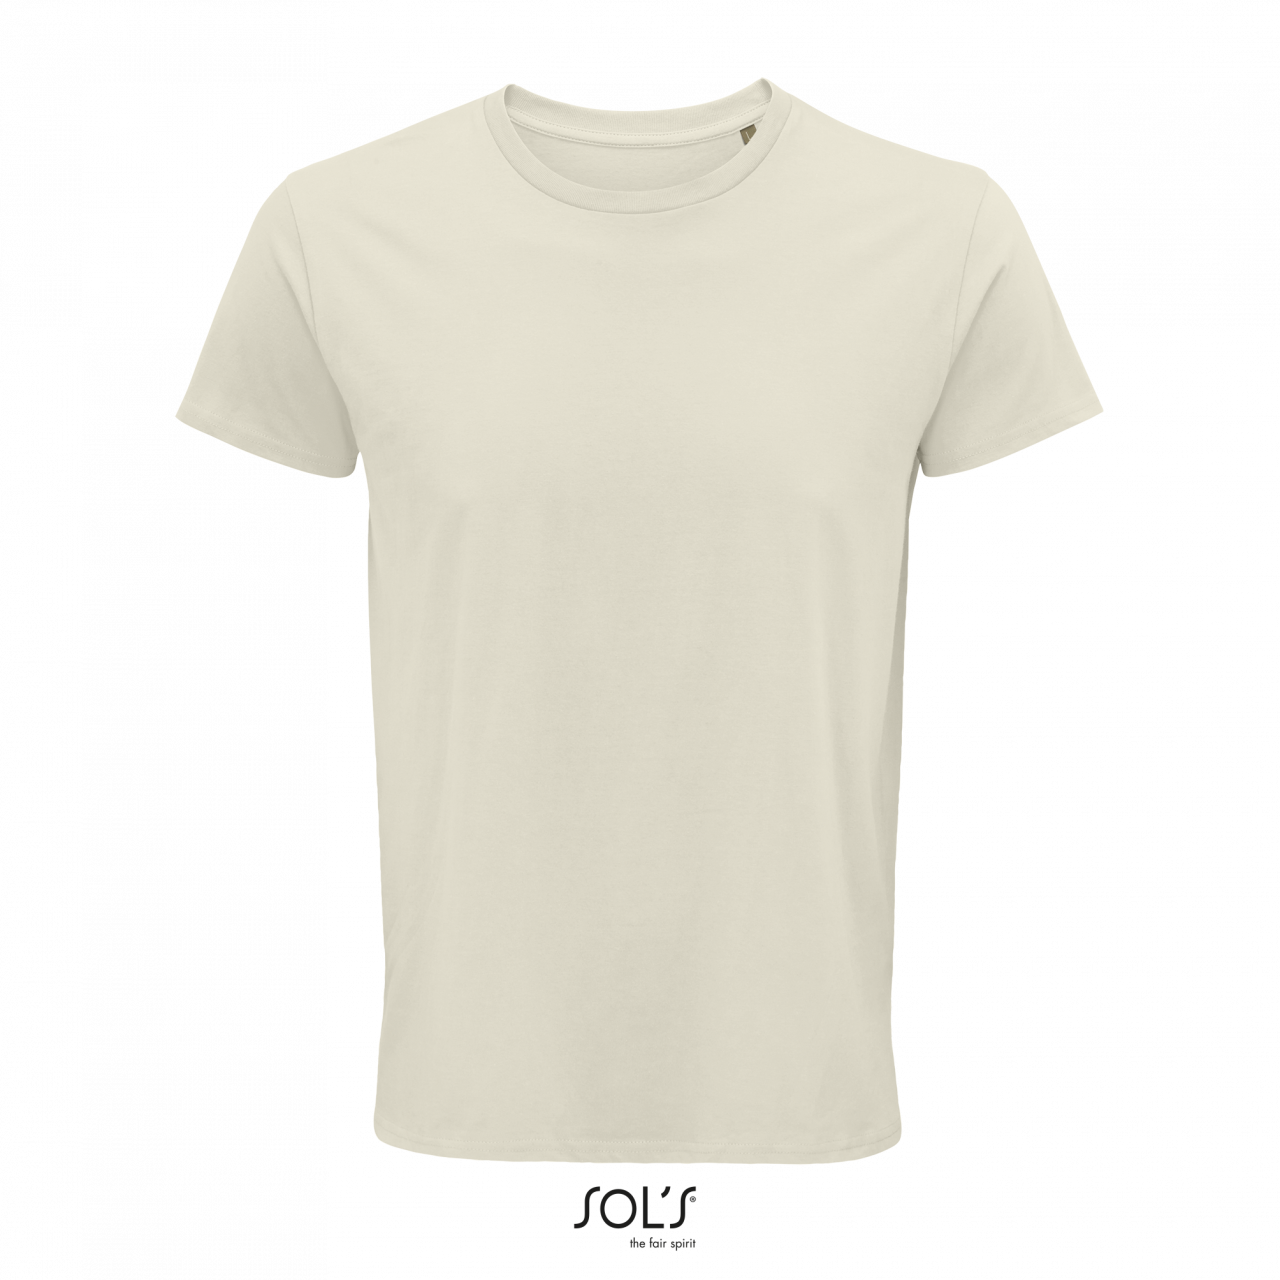 Sol's Crusader Men - Round-neck Fitted Jersey T-shirt - Sol's Crusader Men - Round-neck Fitted Jersey T-shirt - Natural